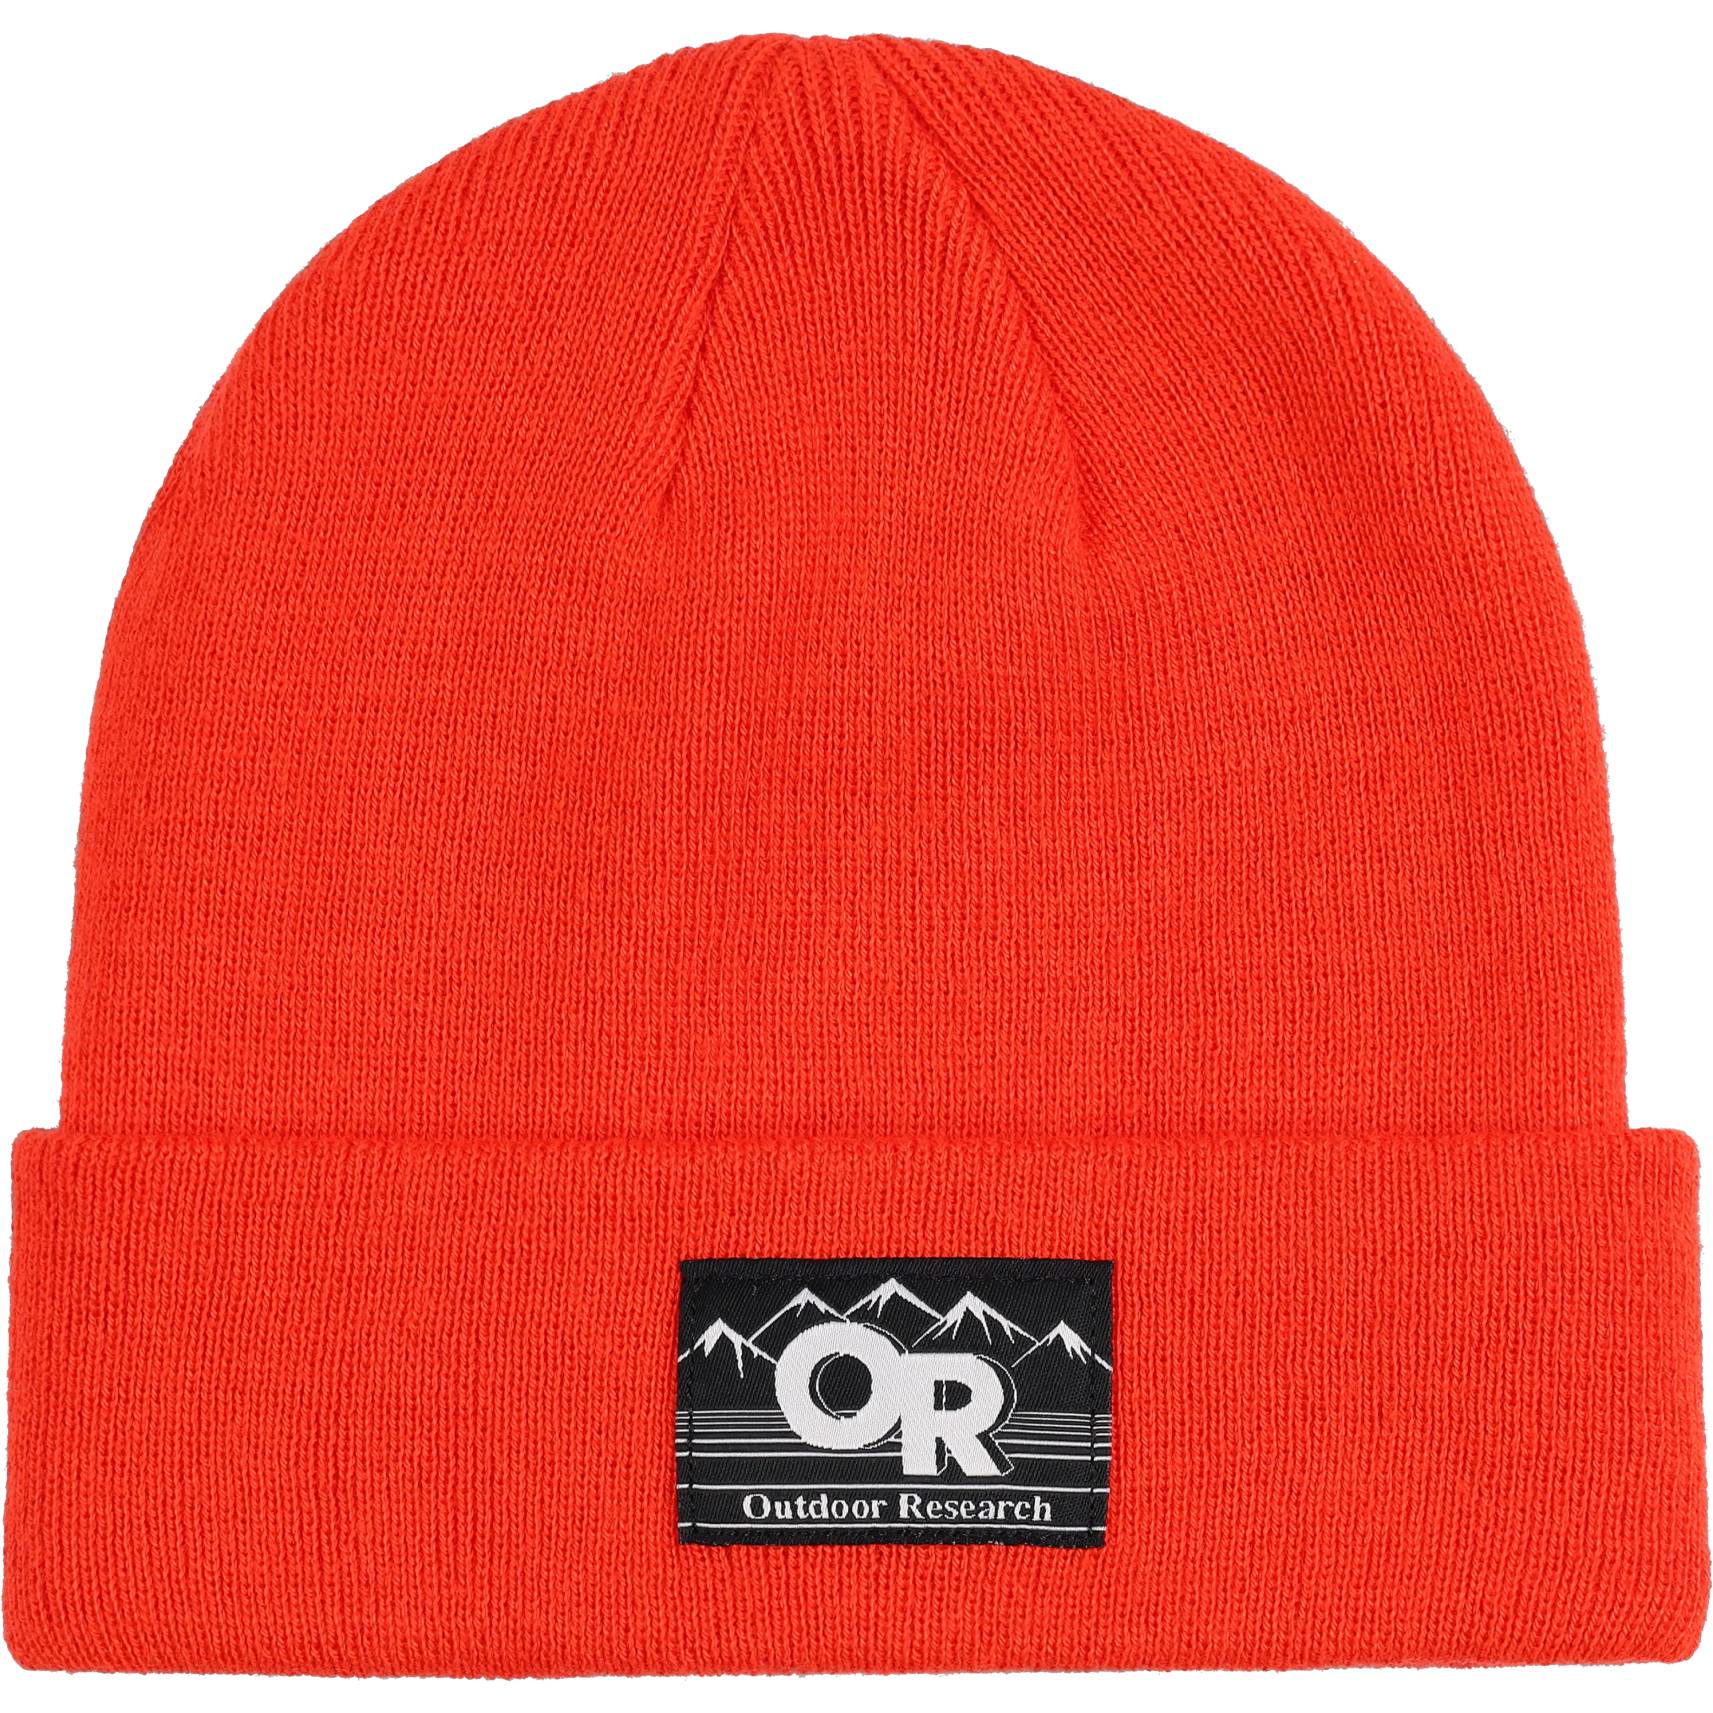 Picture of Outdoor Research Juneau Beanie - spice